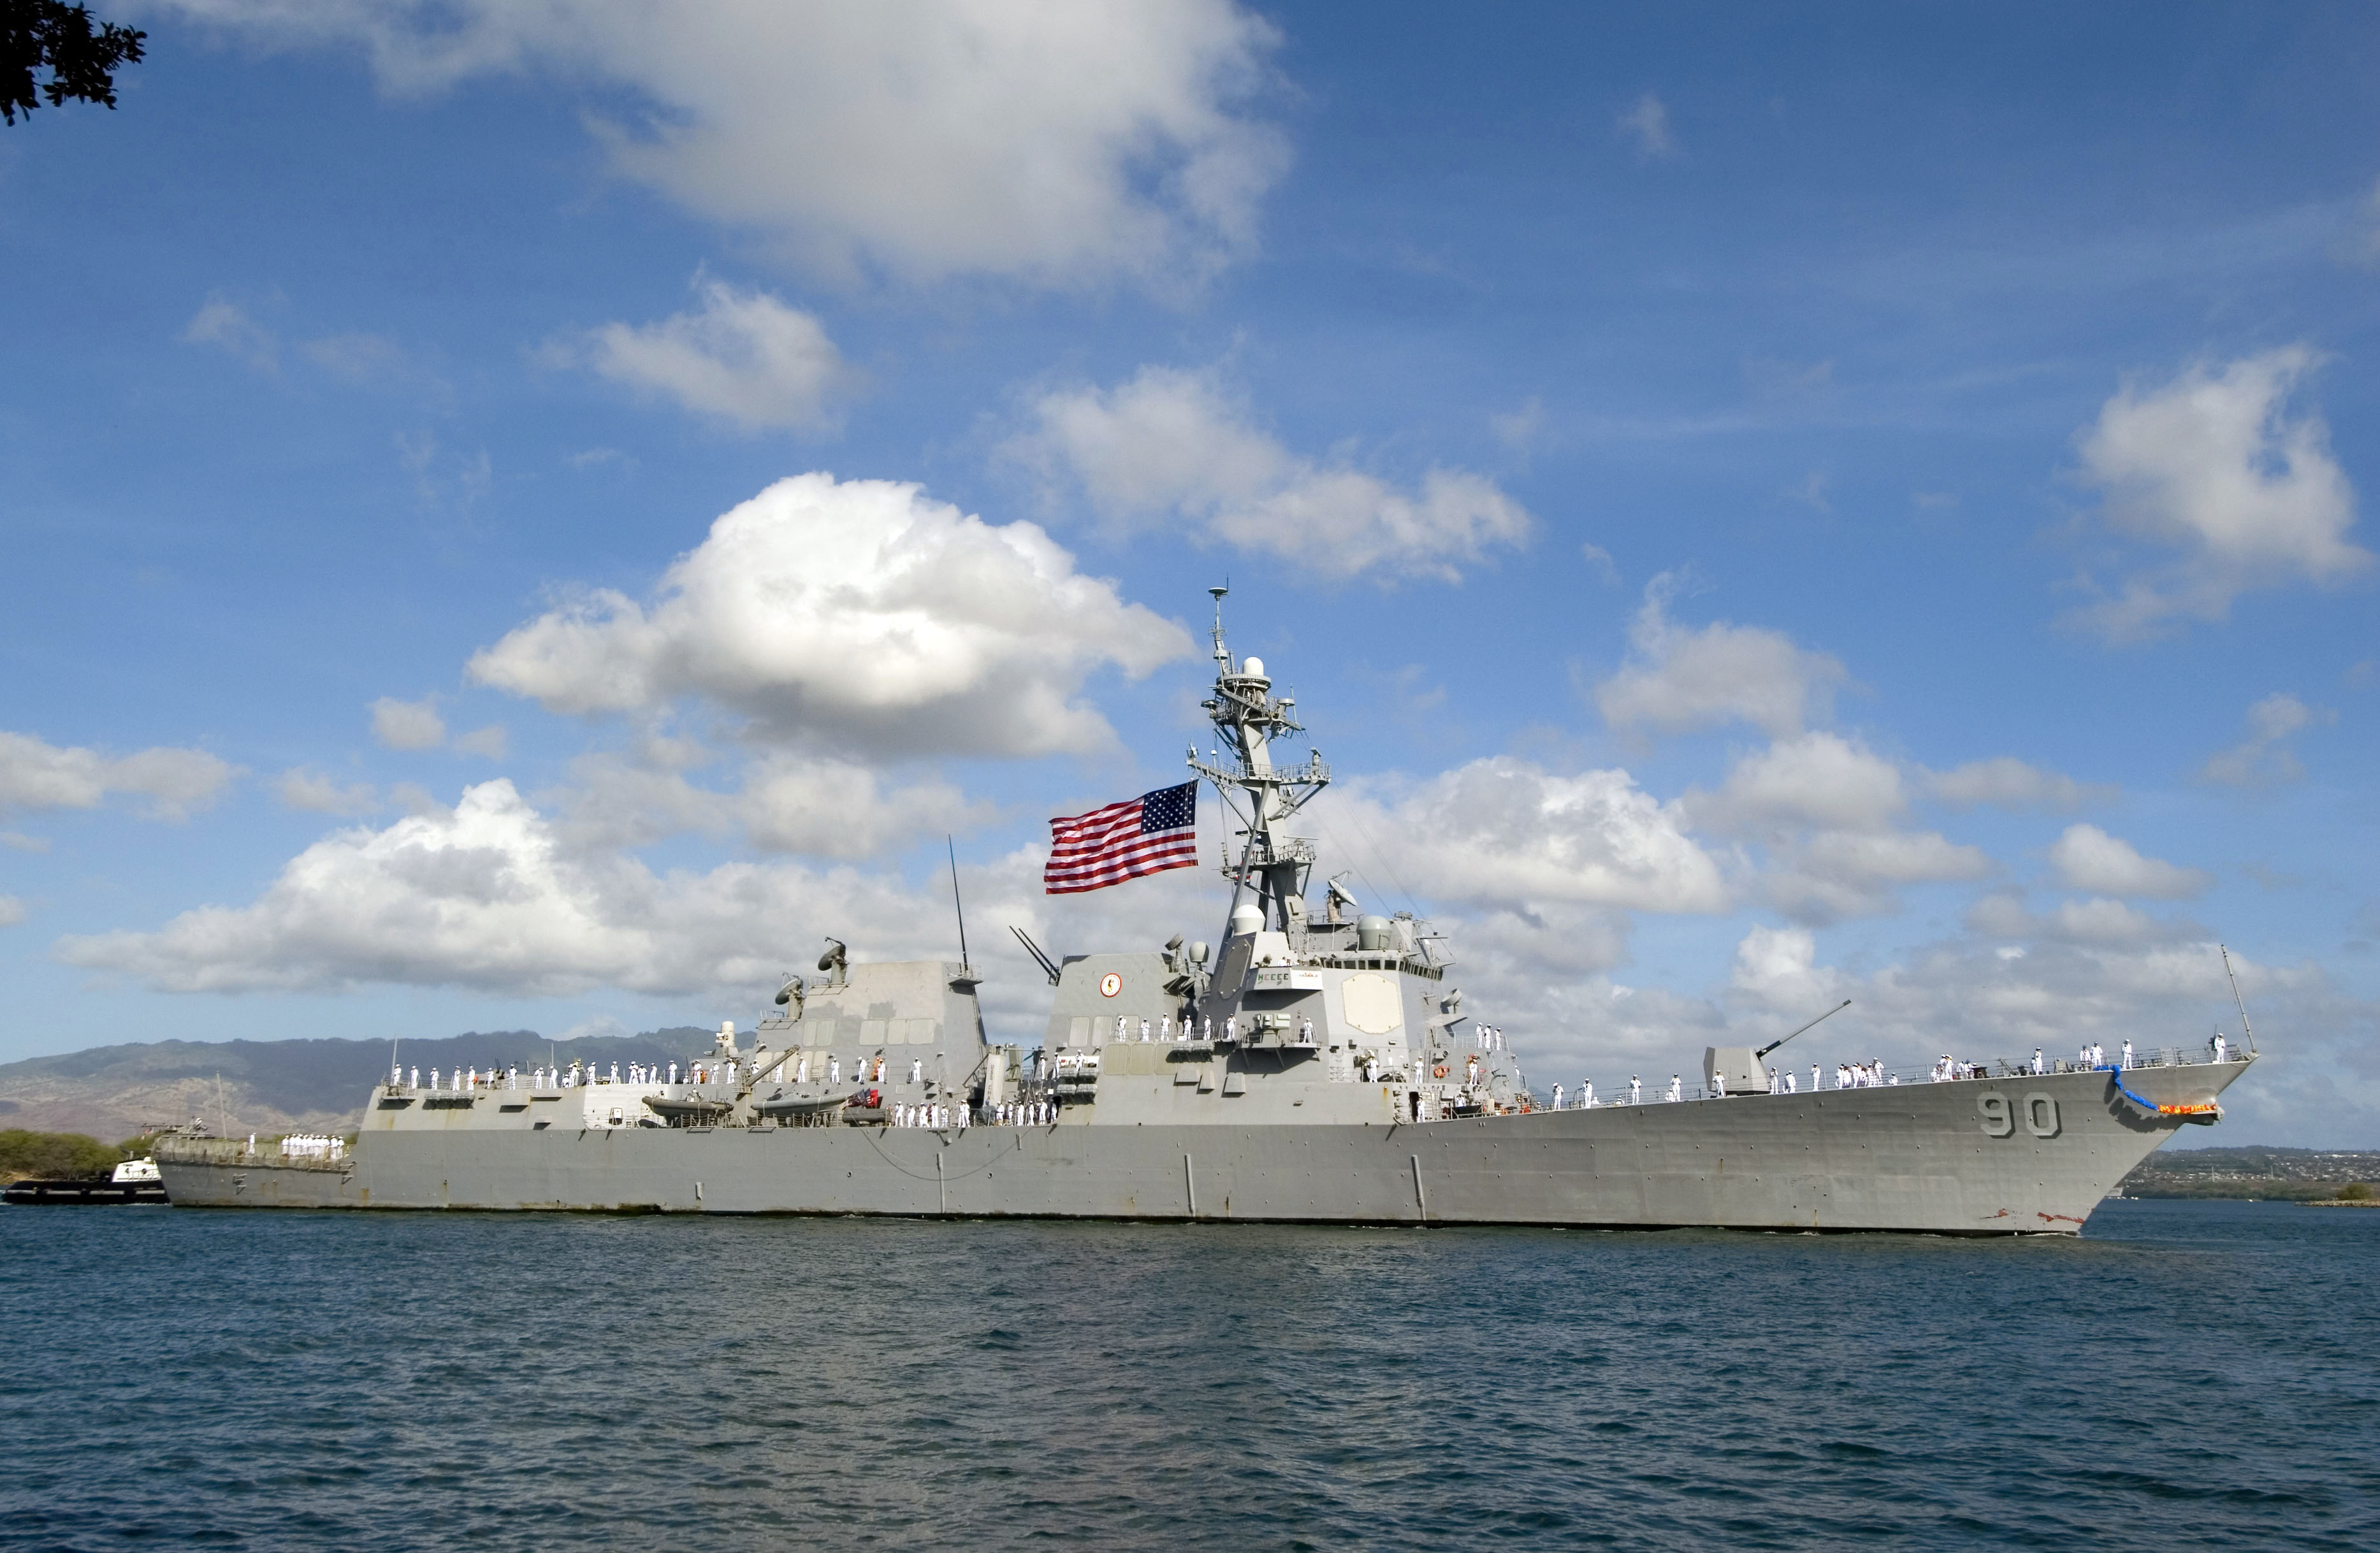 US_Navy_070922-N-6674H-009_Guided-missile_destroyer_USS_Chafee_(DDG_90)_returns_from_deployment.jpg